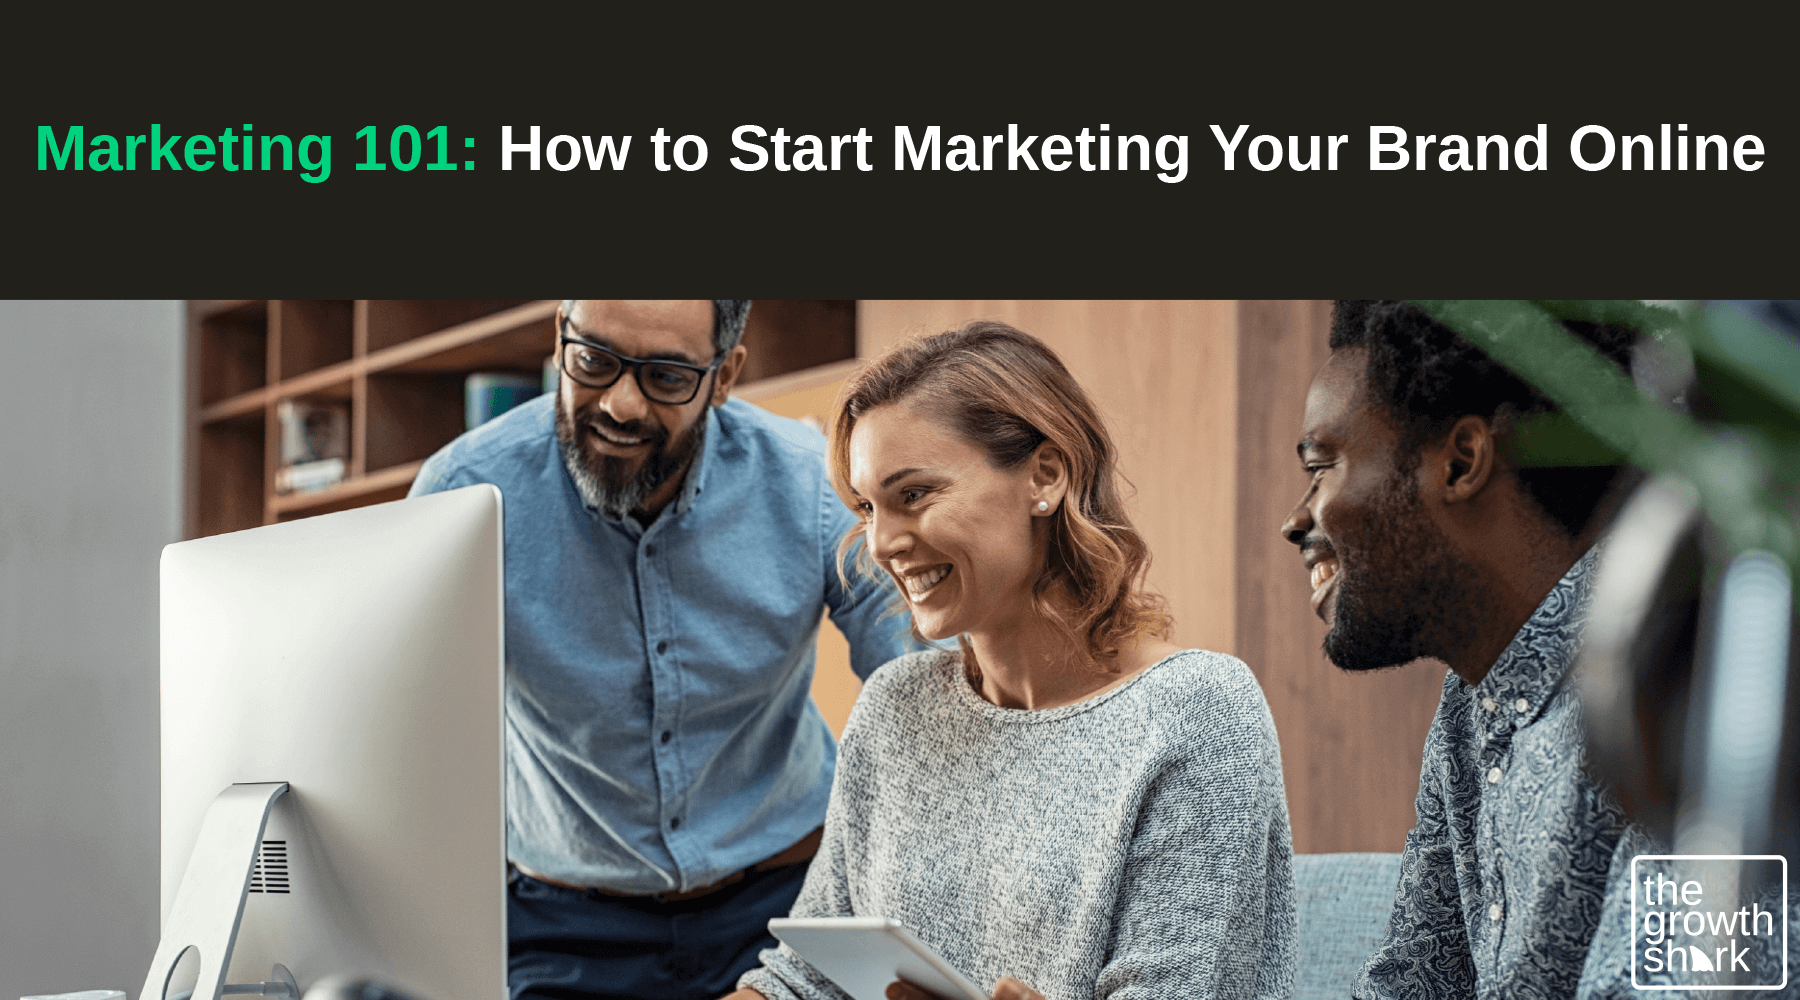 Learn marketing fundamentals and how to start marketing your business online